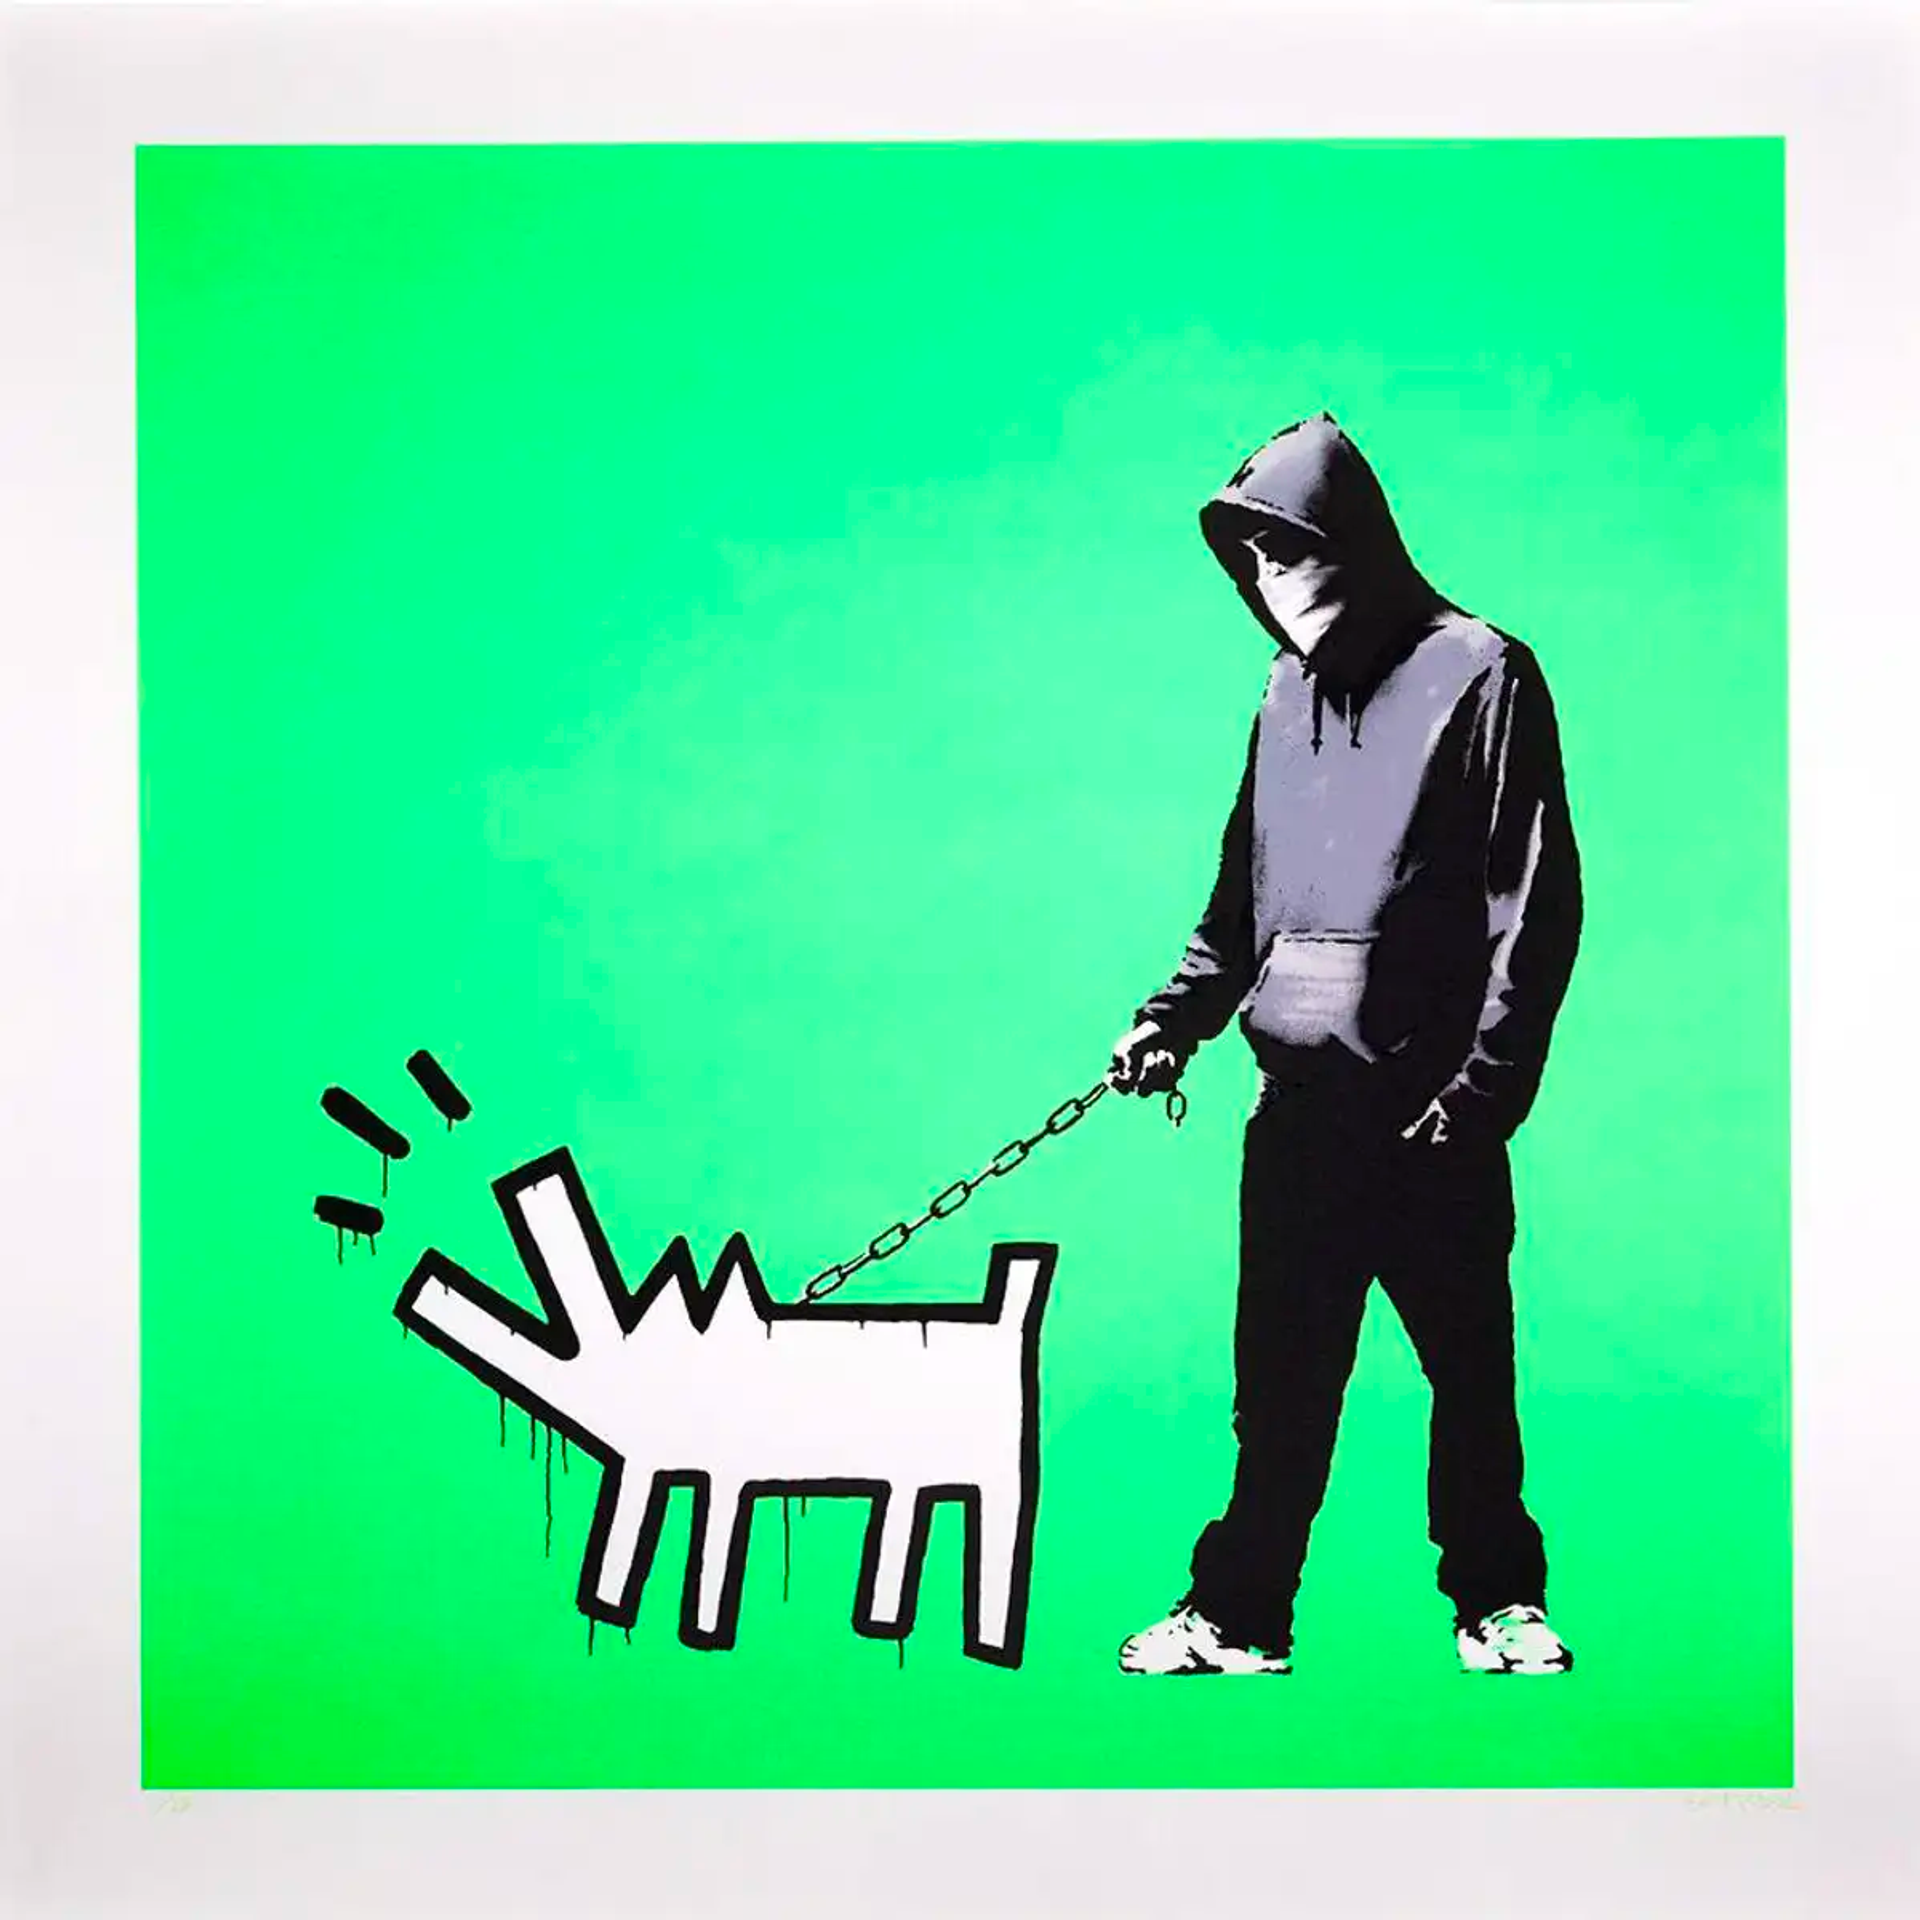 A young man wearing denim and an oversized hooded sweatshirt, with a bandana covering his face and his hood pulled up, stands in a wide stance. He has one hand in his pocket and holds a cartoon barking dog on a chain leash. The artwork is set against a vibrant flourescent green background.